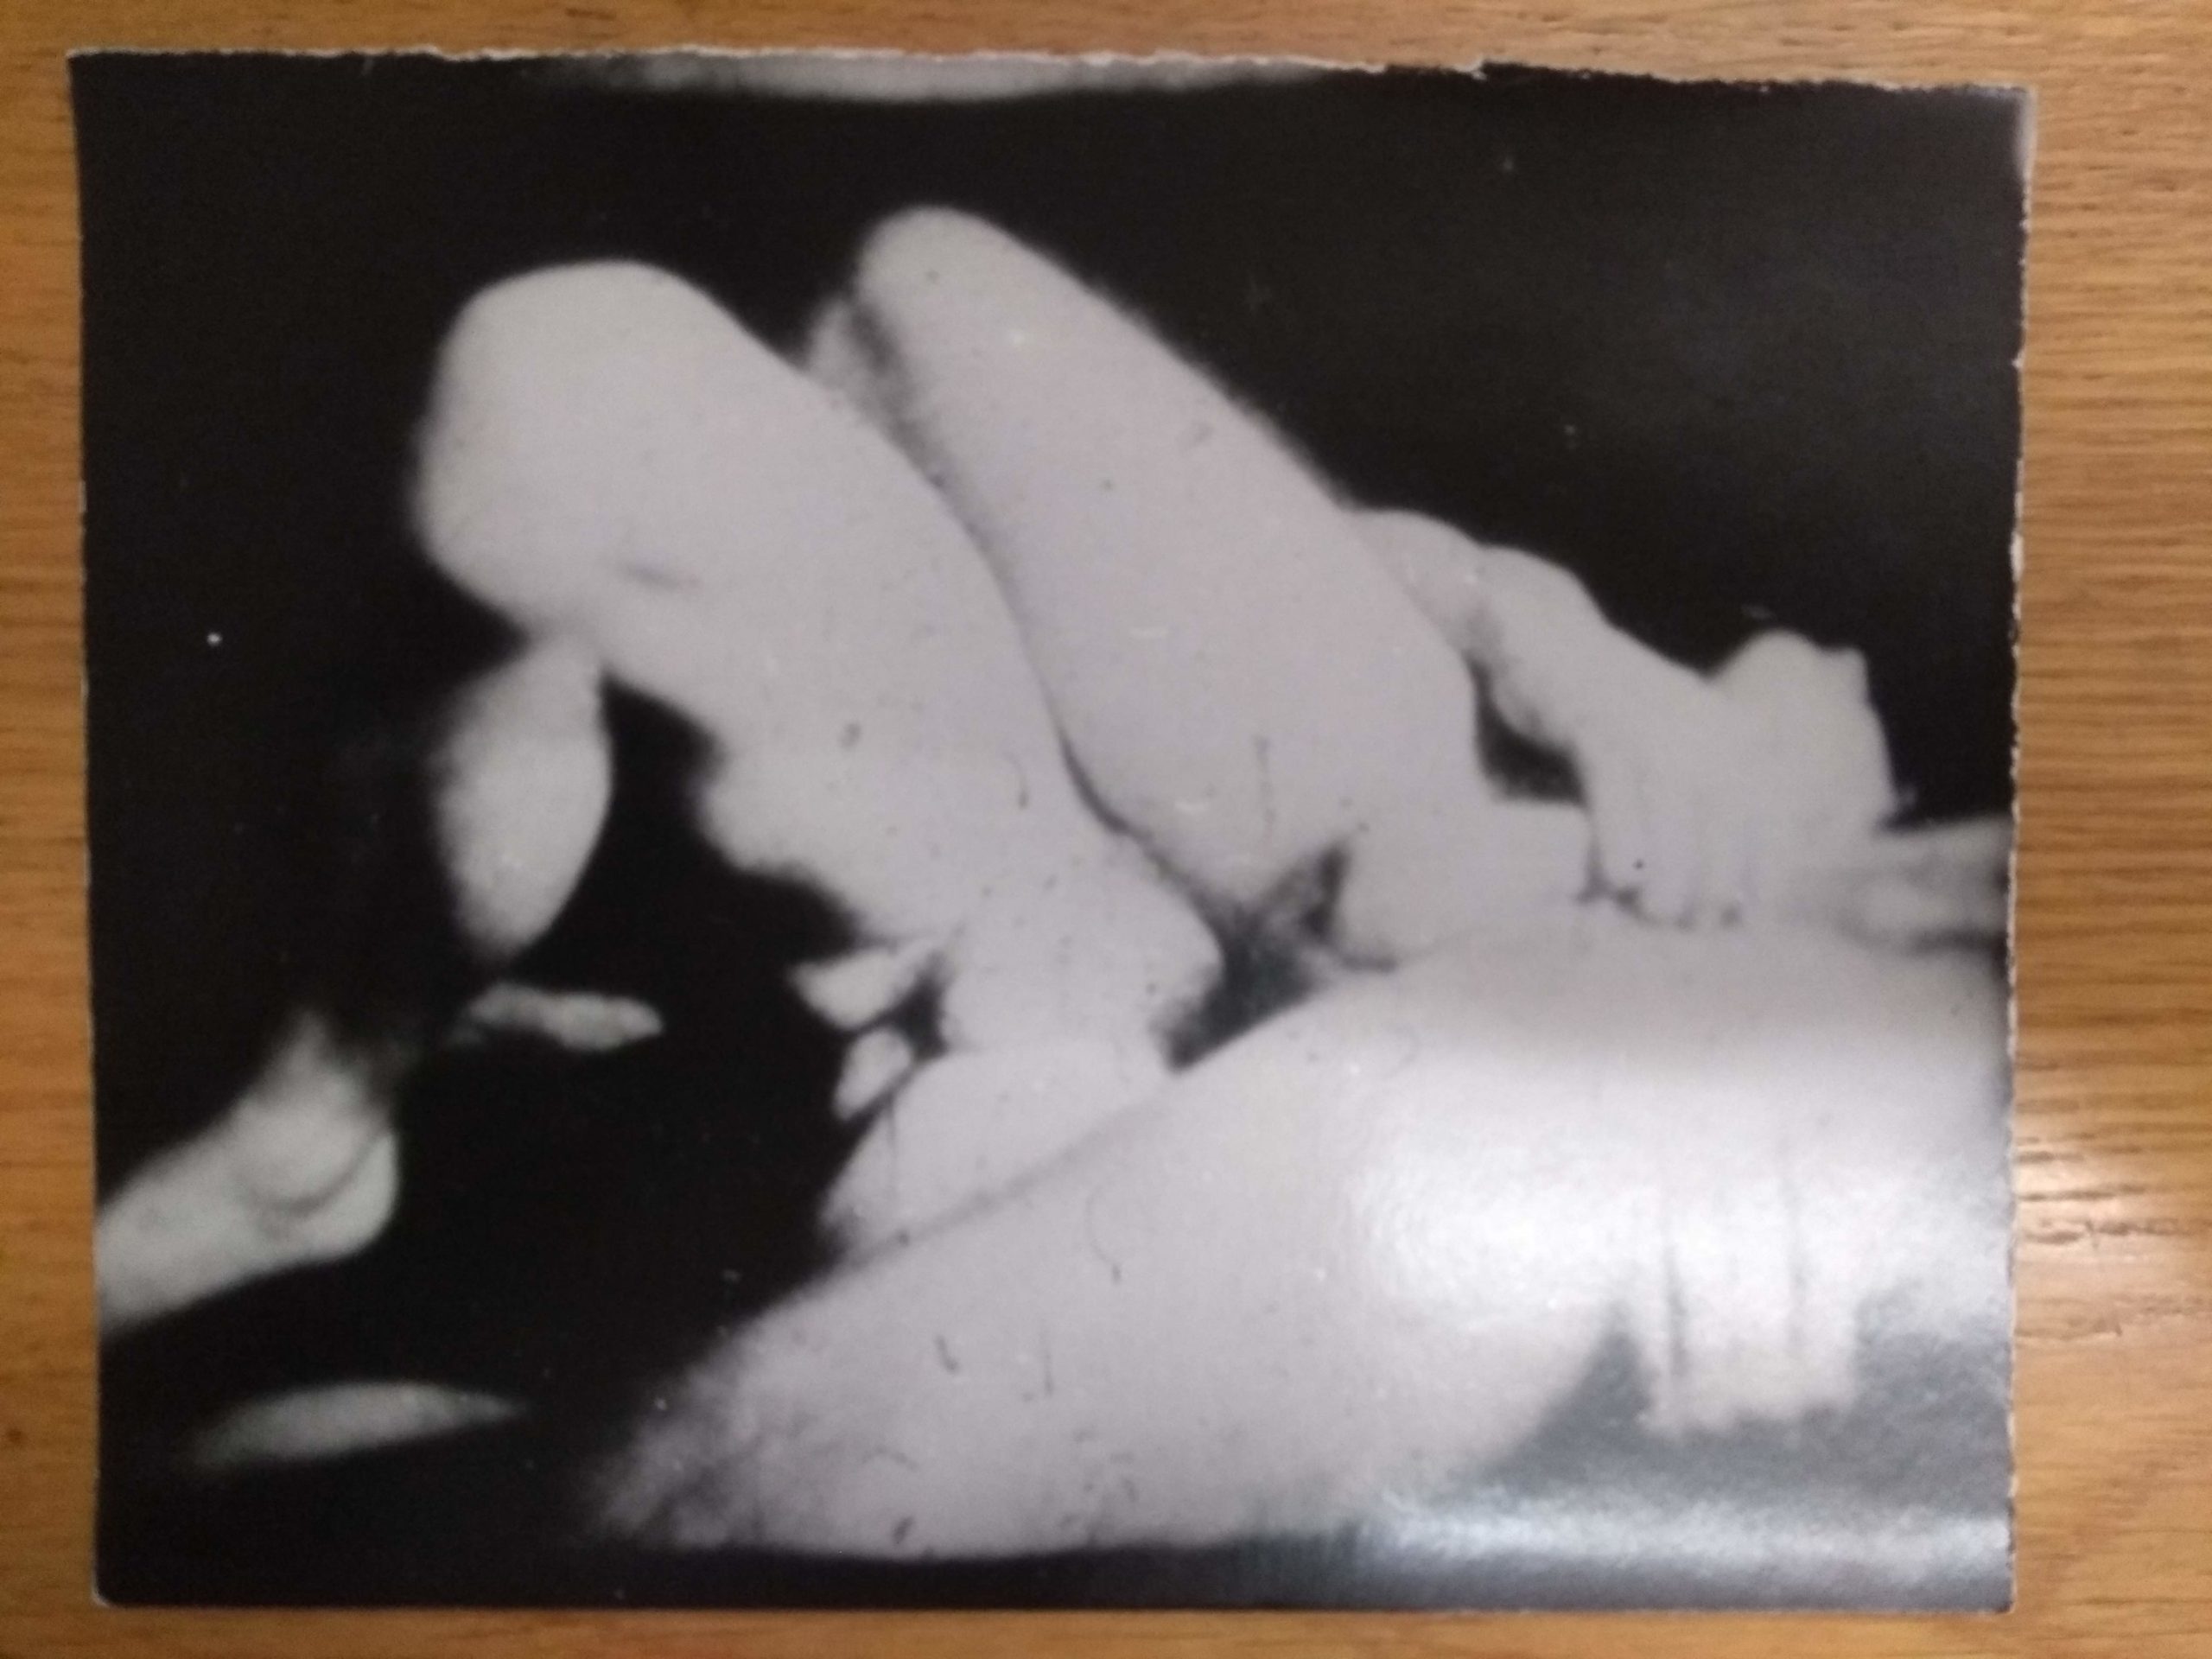 A B&W photograph of abstract body parts with a hint of foot and and hands. 